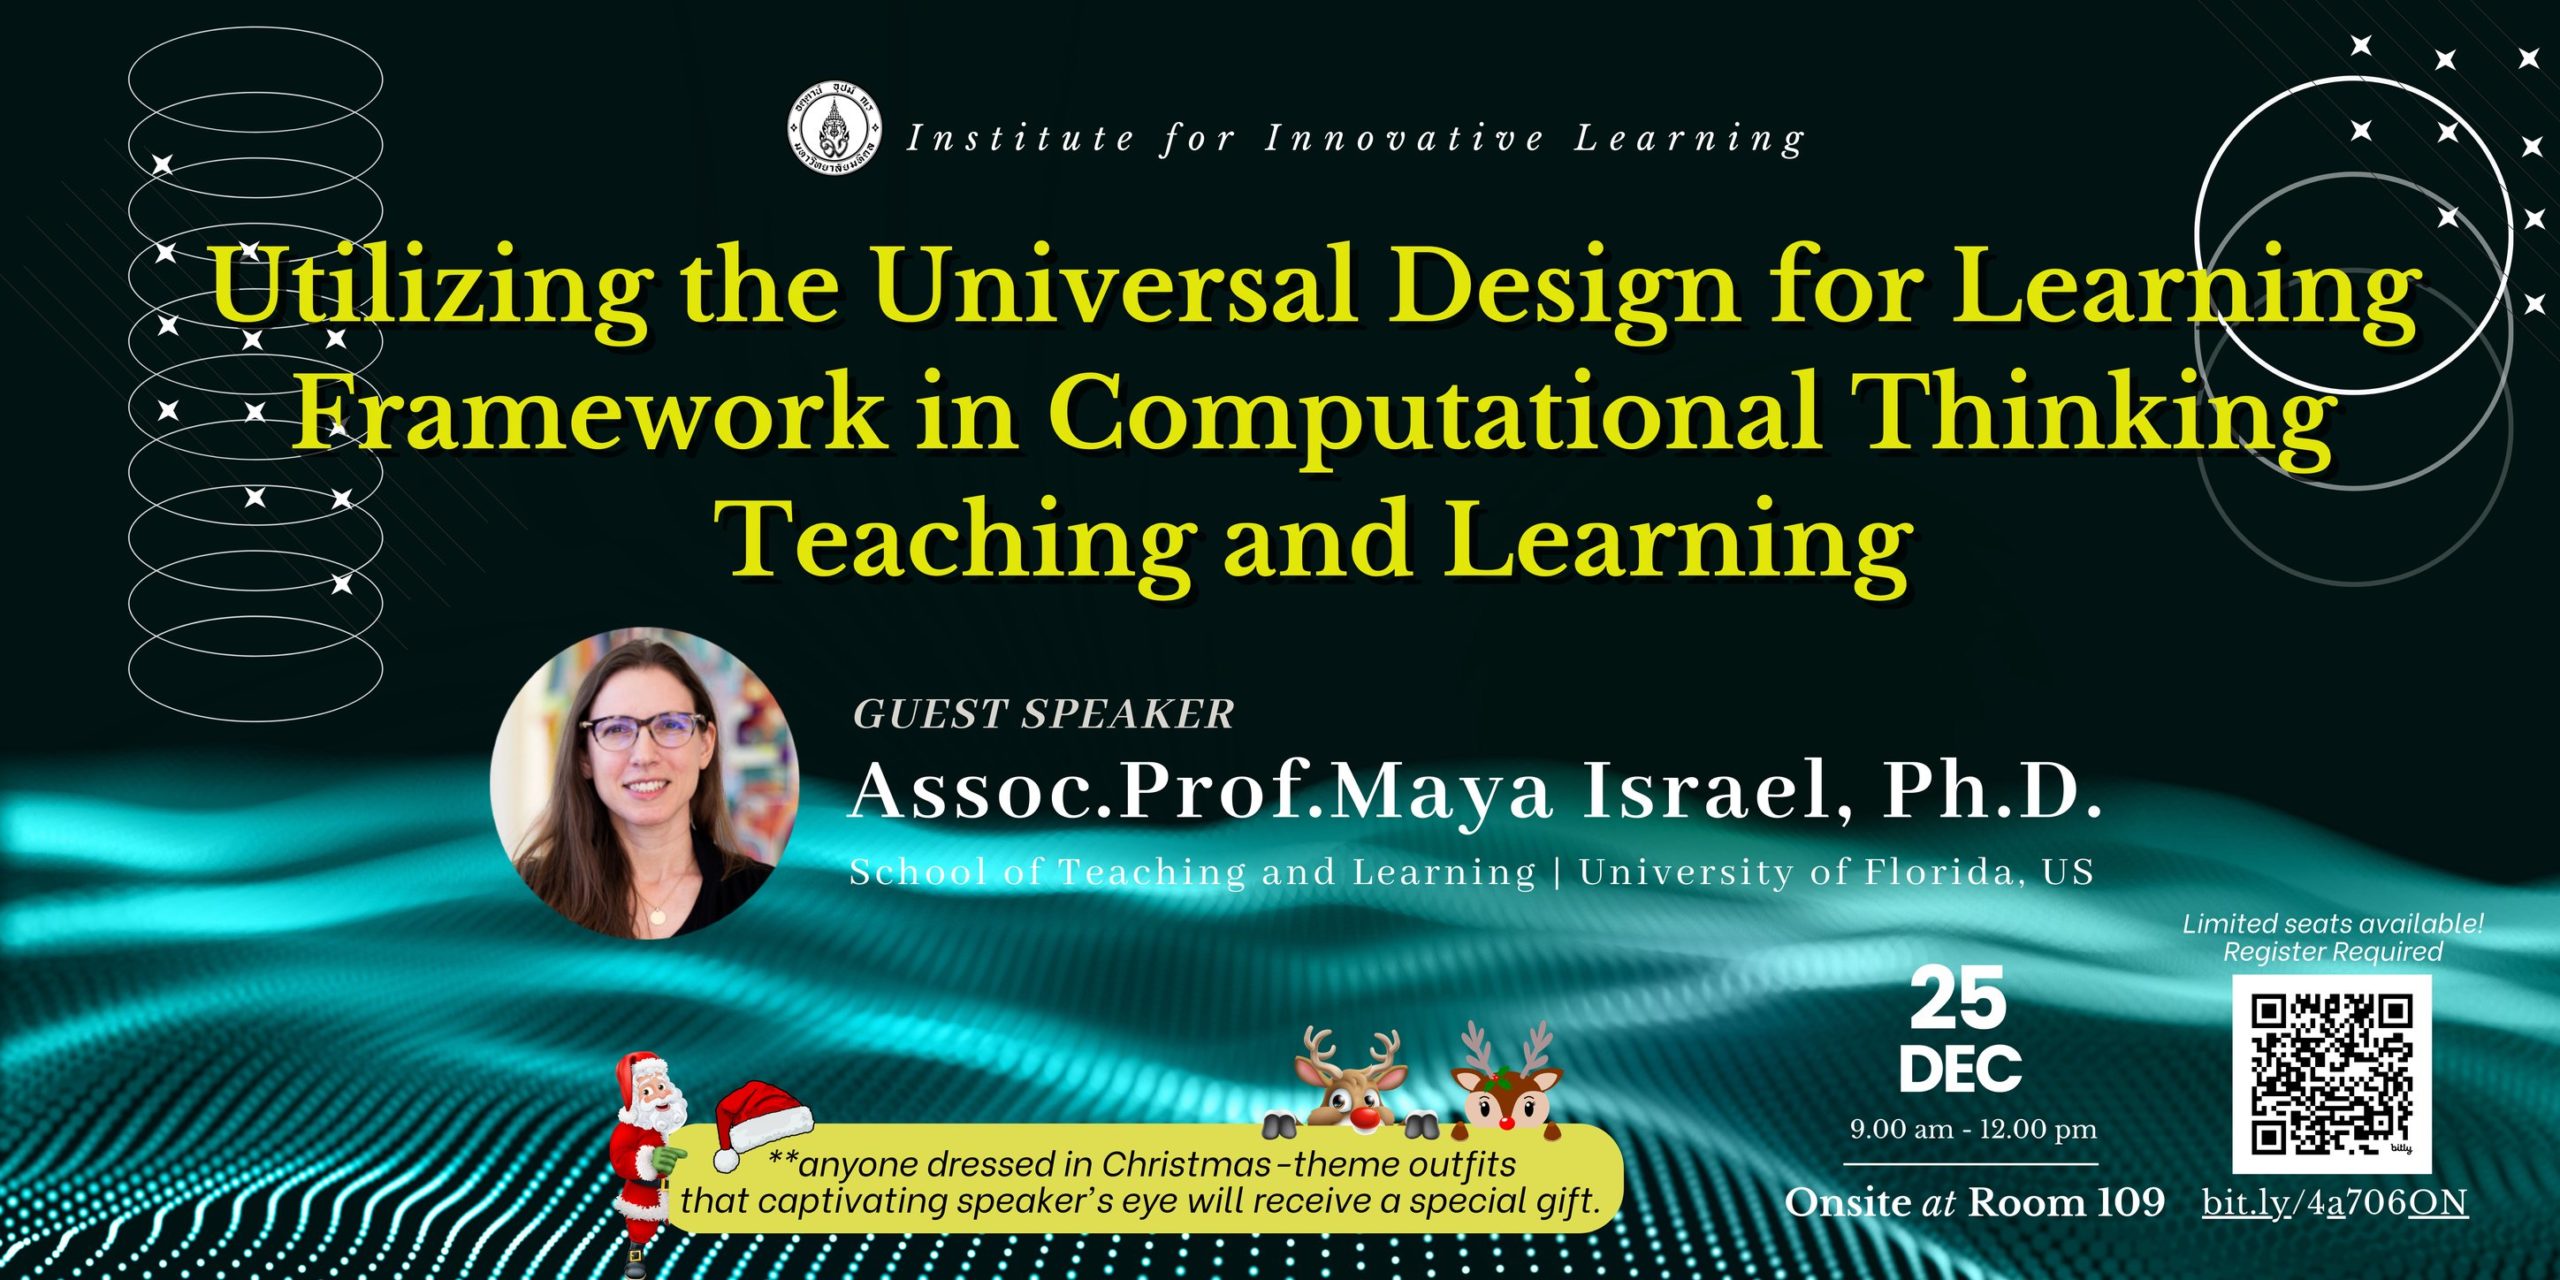 IL Seminar “Utilizing the Universal Design for Learning Framework in Computational Thinking Teaching and Learning”